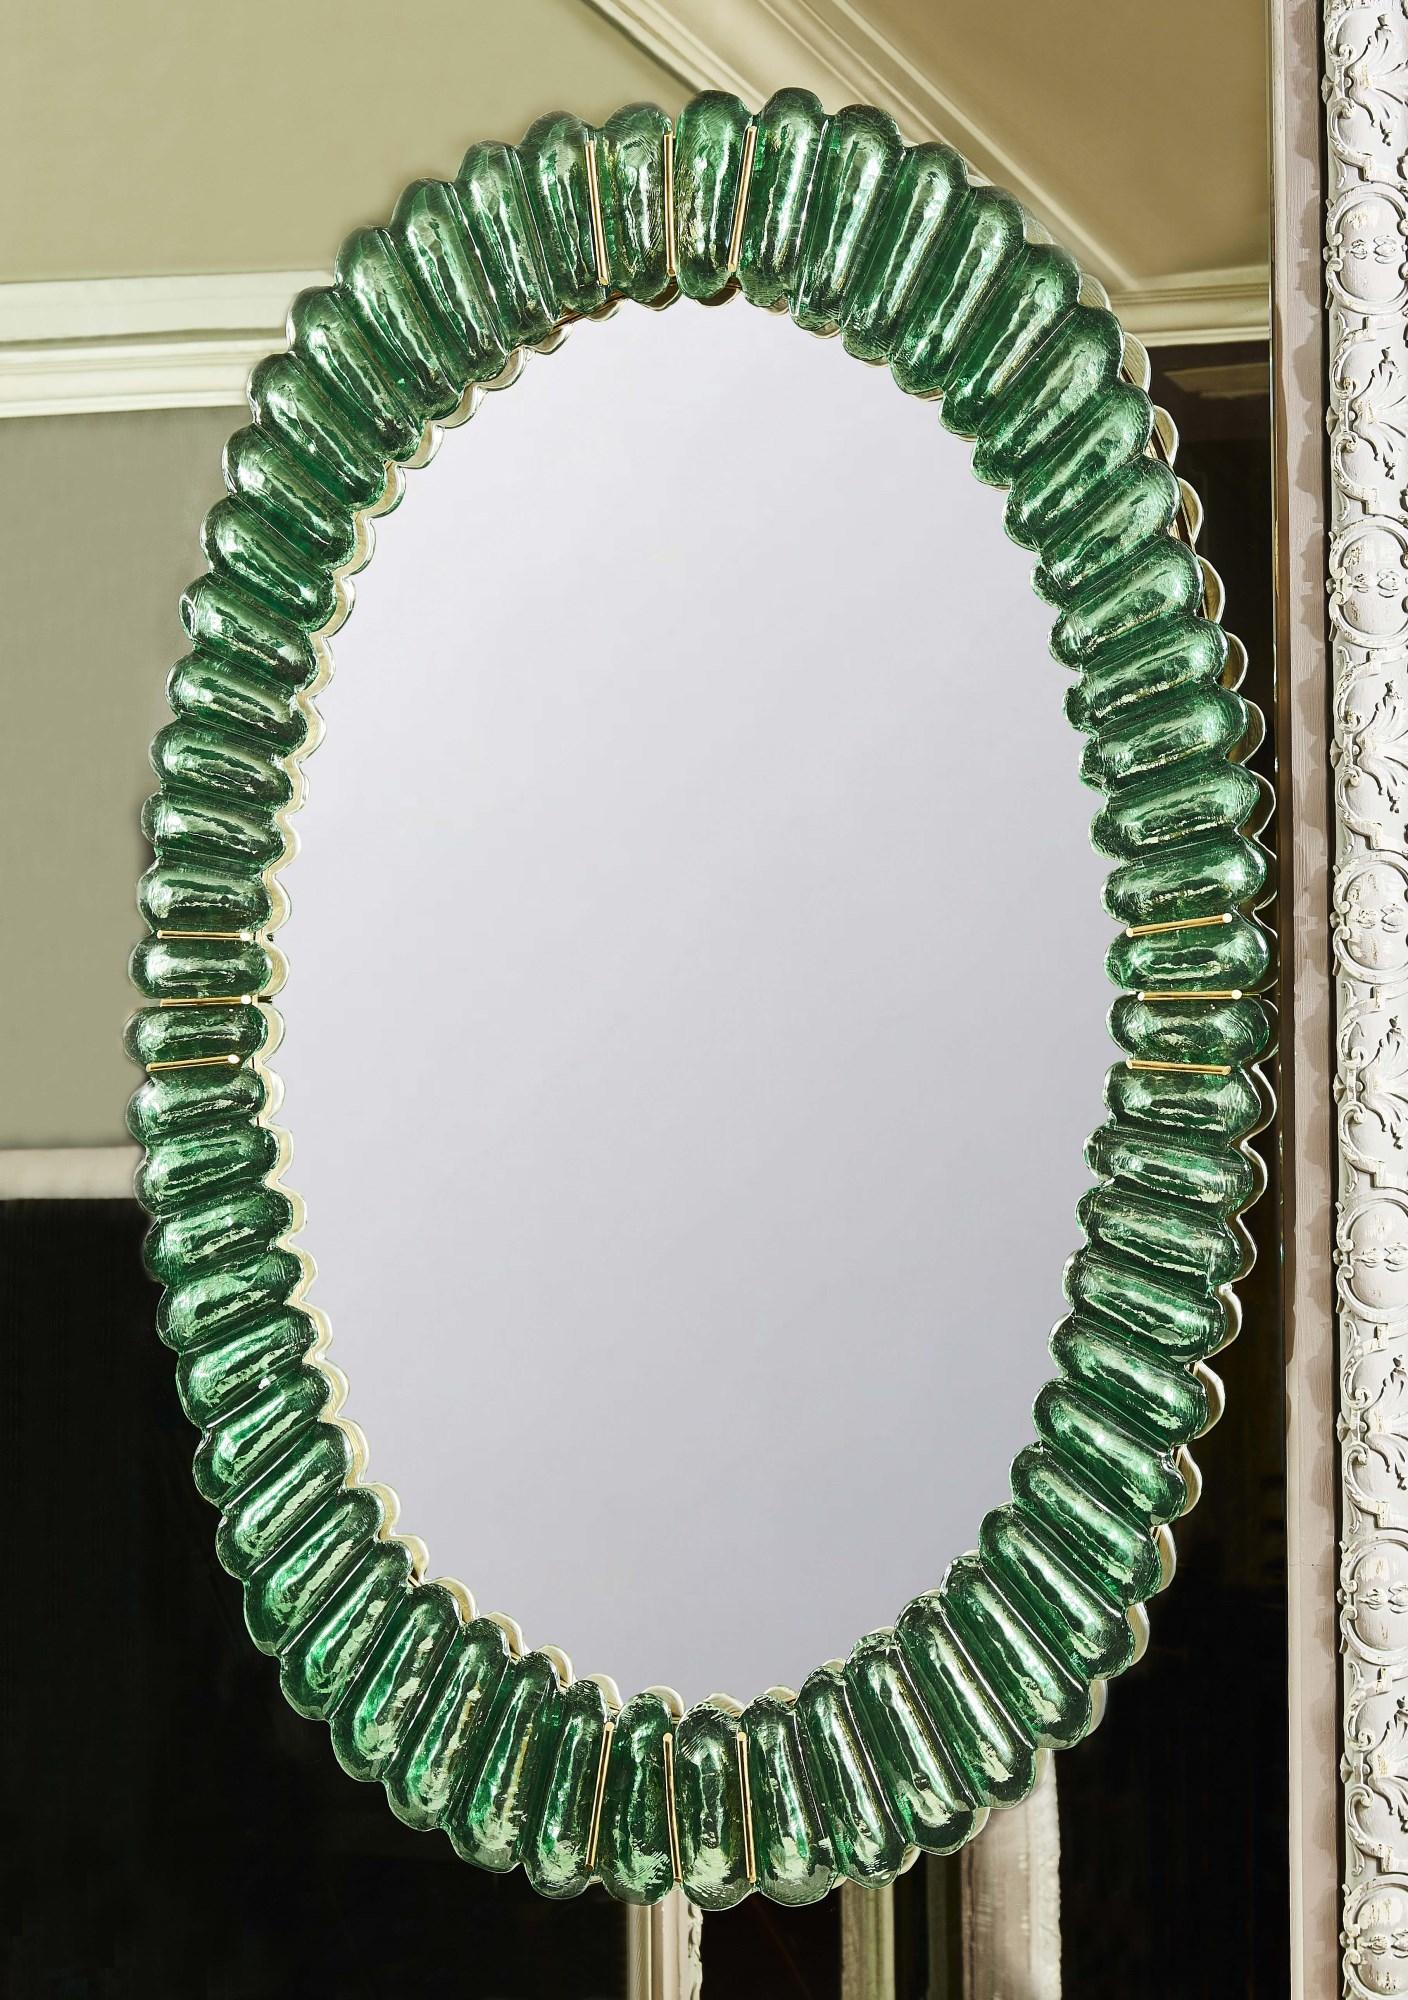 Pair of oval mirrors made of green Murano glass and brass inlays,
Italy, 1970s style.